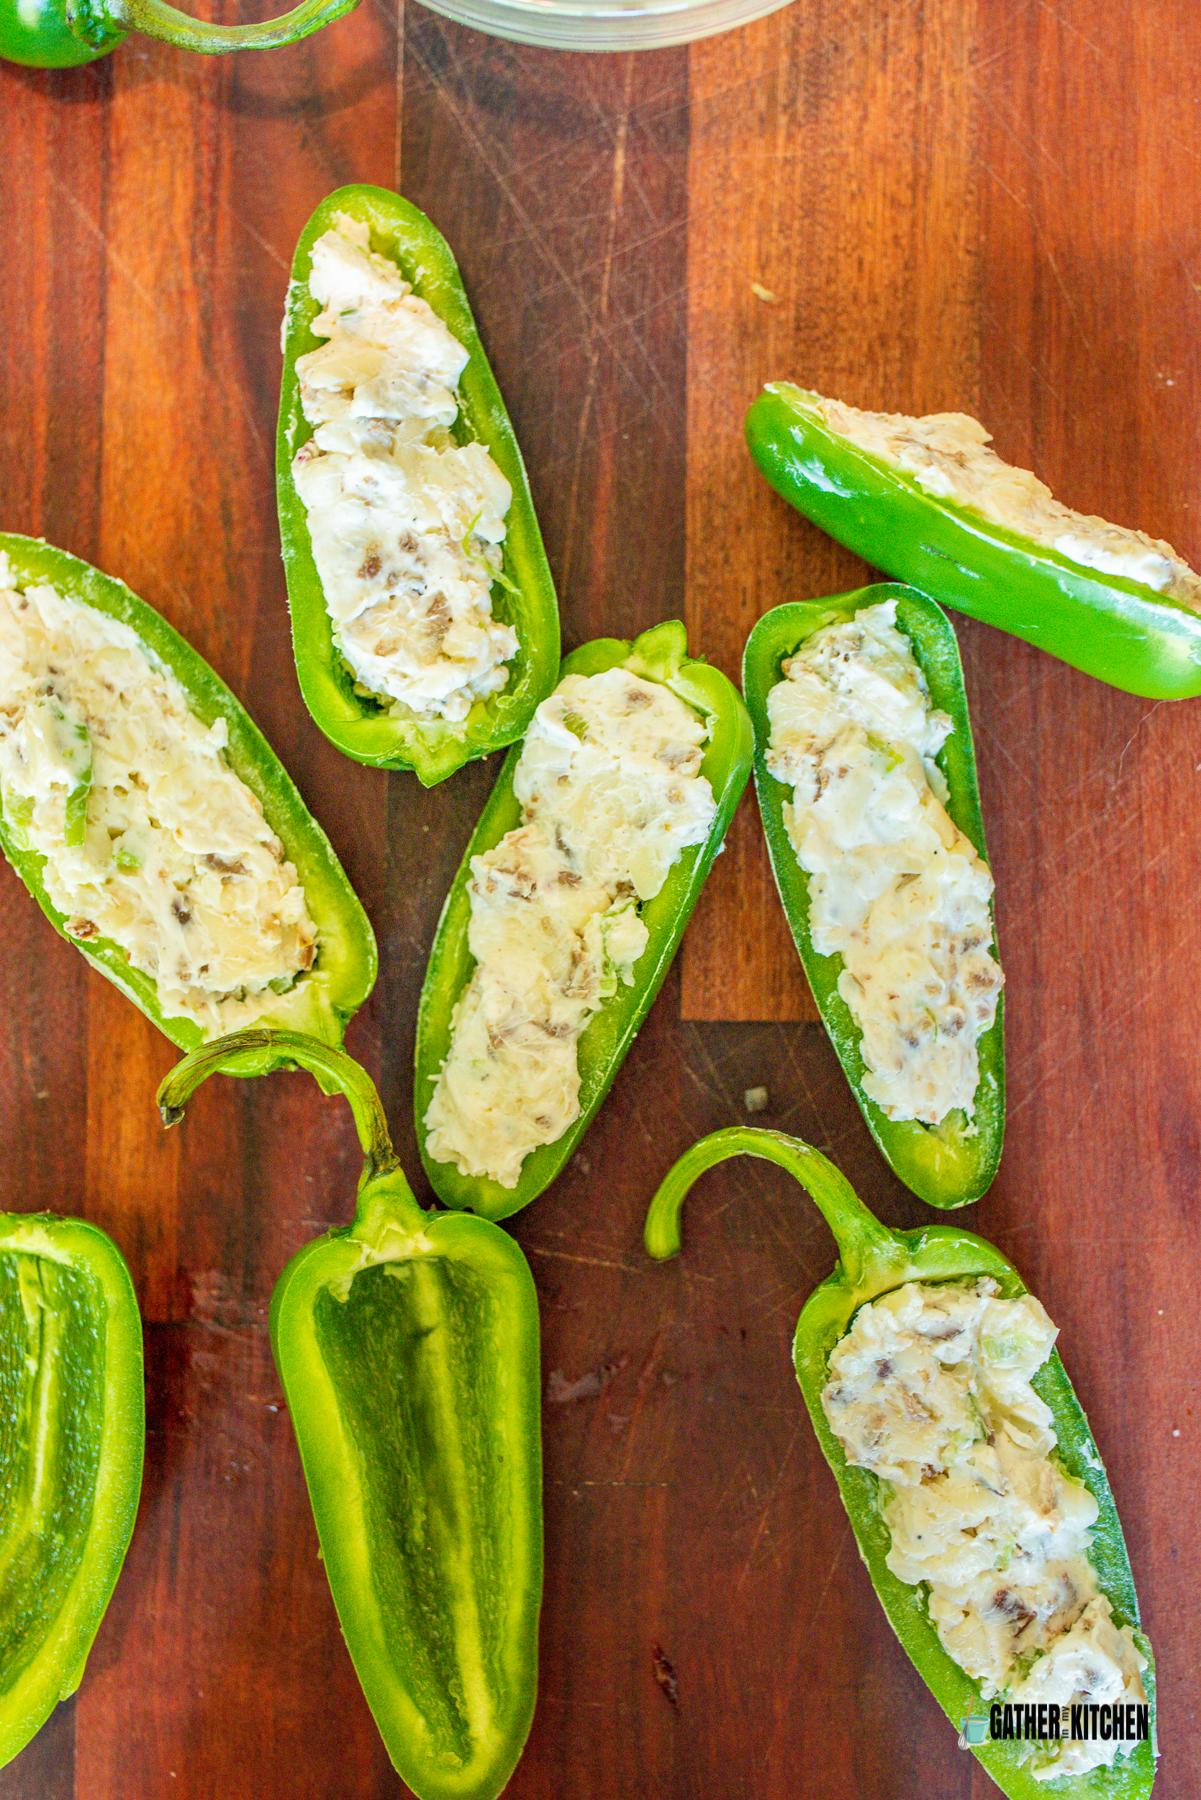 Jalapeno popper stuffed with cream cheese filling.